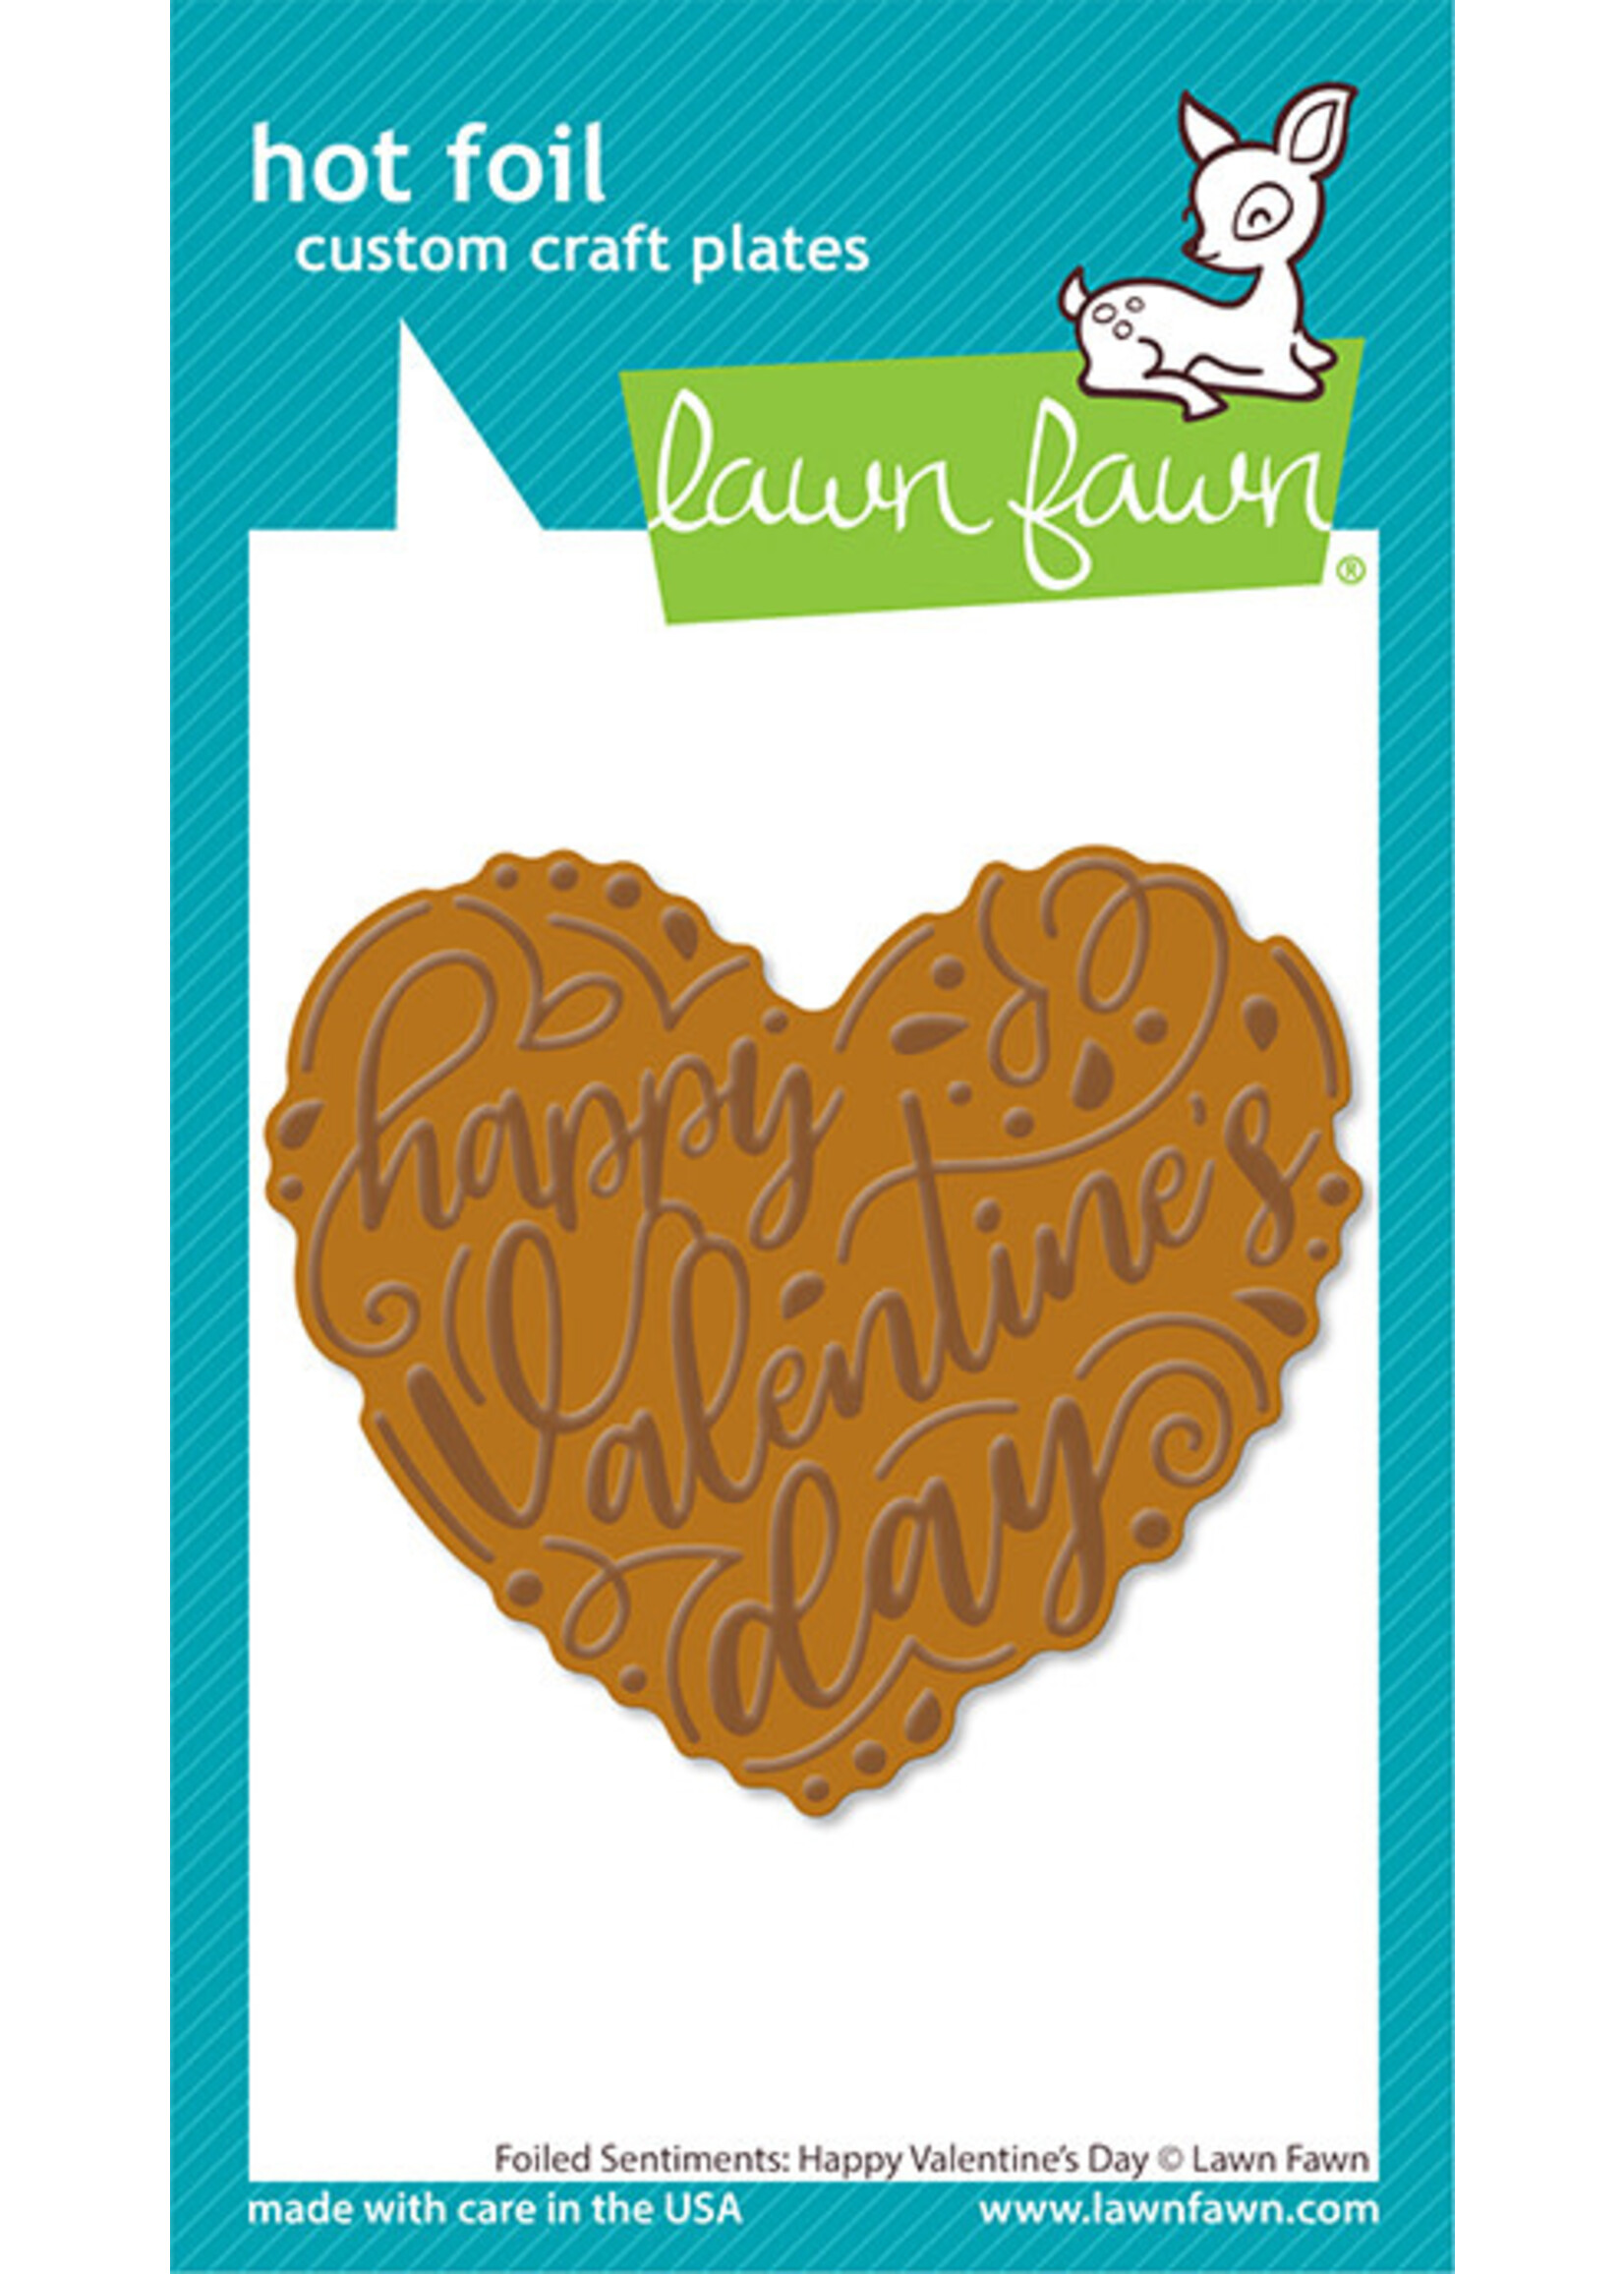 Lawn Fawn foiled sentiments: happy valentine's day hot foil plate